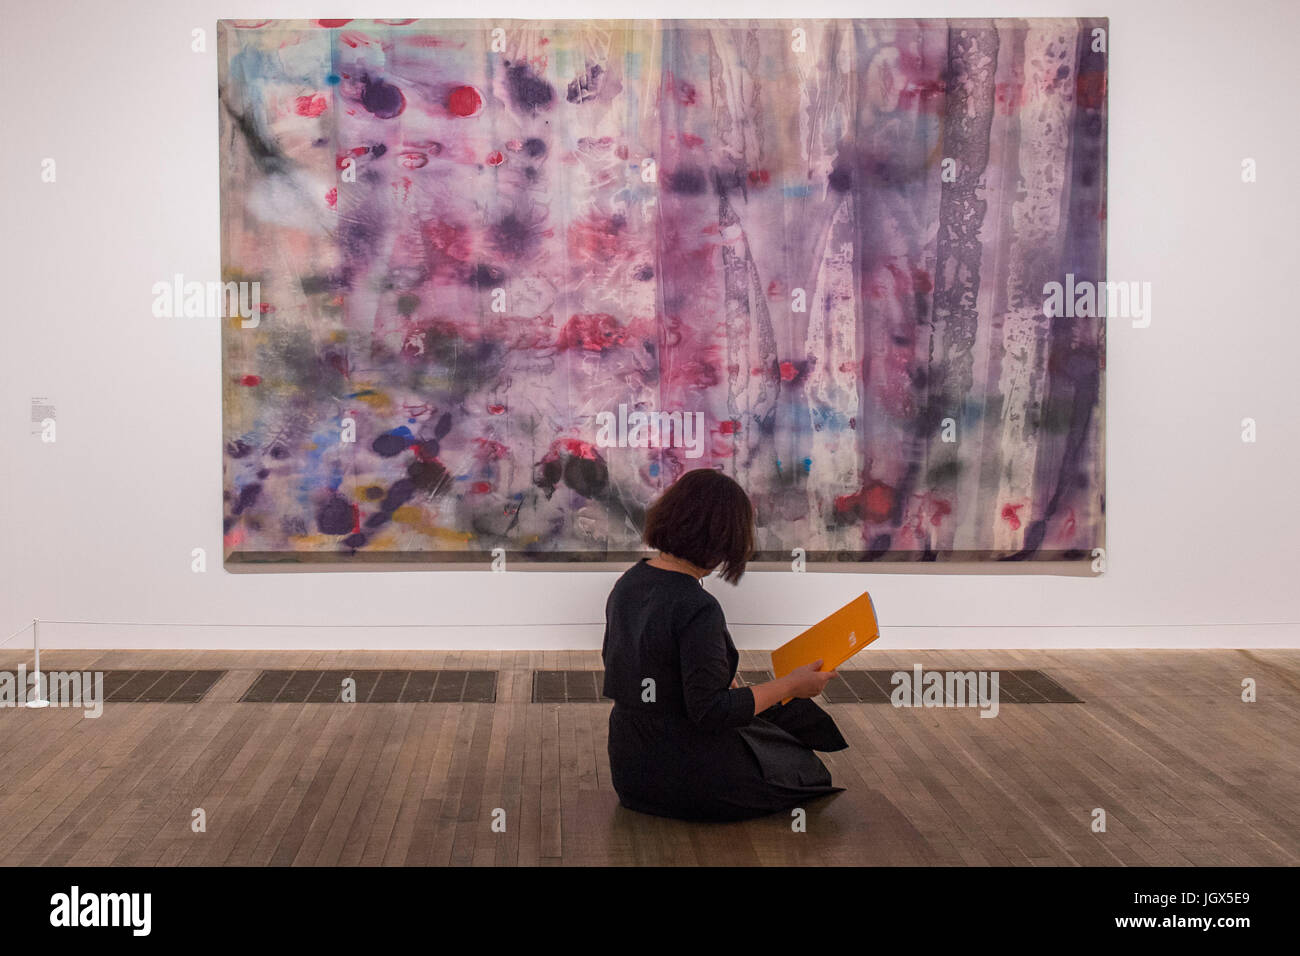 London, UK. 11th Jul, 2017. April 4 by Sam Gilliam - Soul of a Nation: Art in the Age of Black Power, Tate Modern's new exhibition exploring what it meant to be a Black artist during the Civil Rights movement. The exhibition is at Tate Modern from 12 July – 22 October 2017. Credit: Guy Bell/Alamy Live News Stock Photo